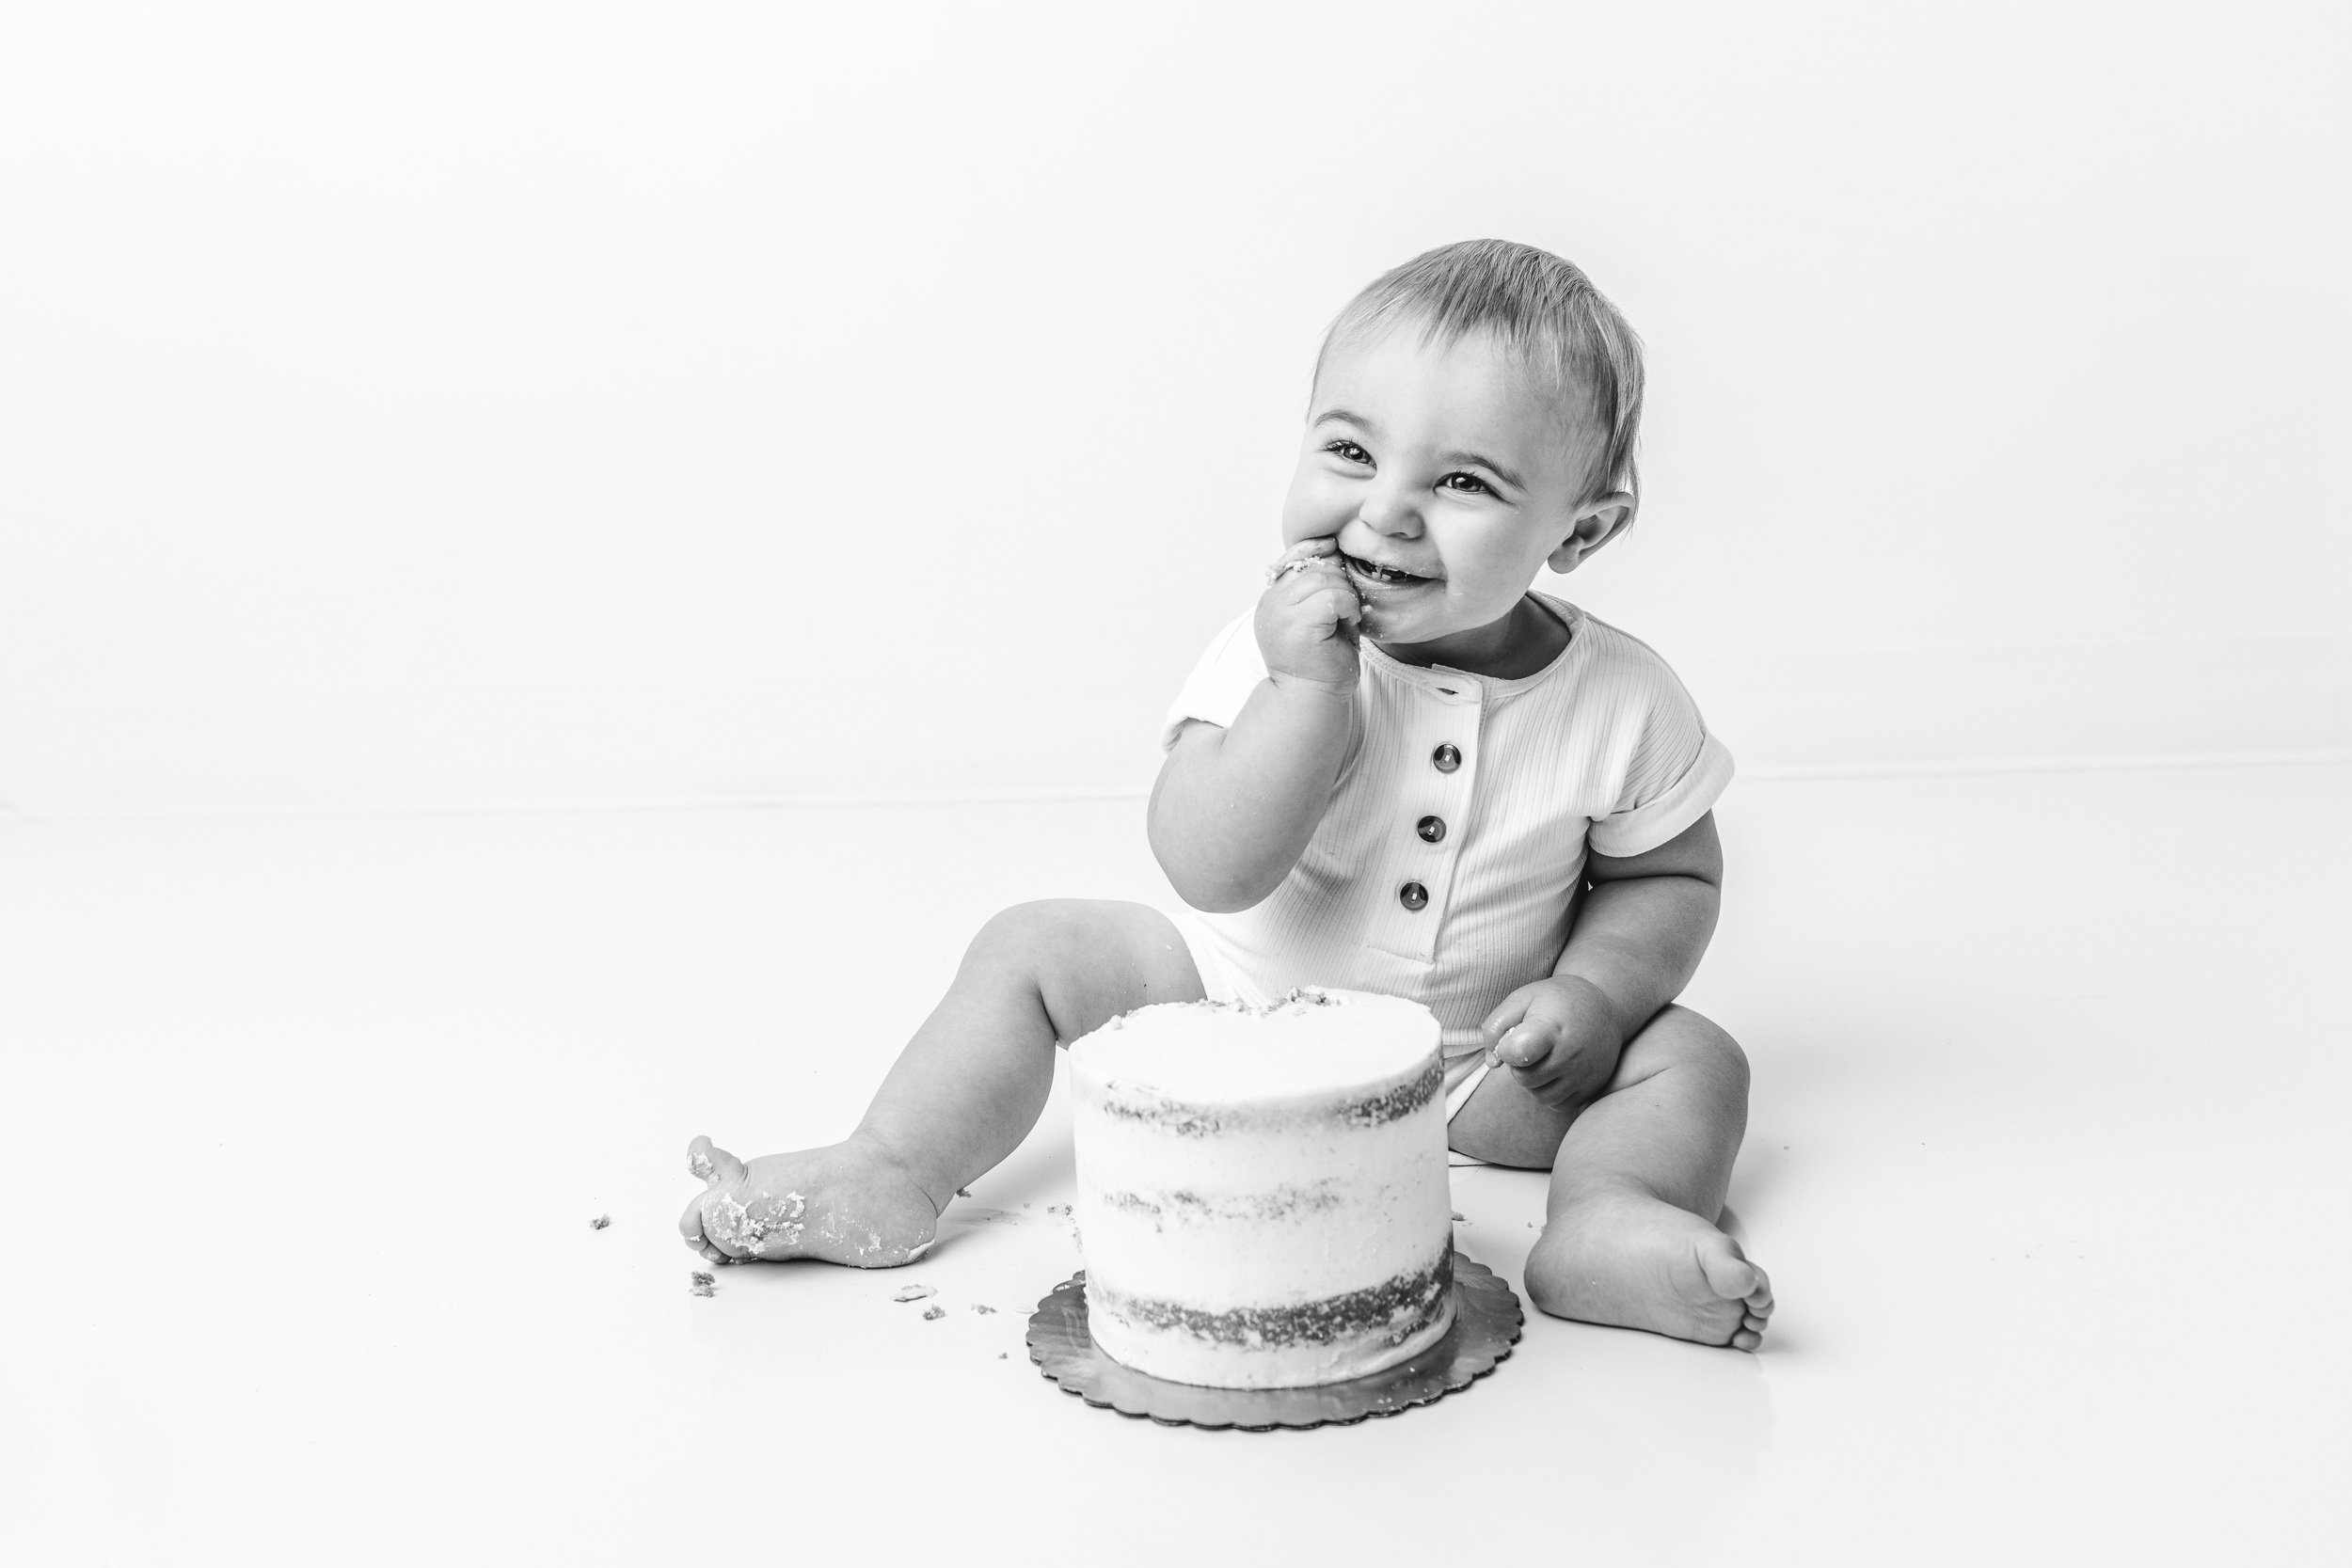  First birthday session with a little boy eating his cake by Nicole Hawkins Photography in NJ. NY NJ child photographers #NicoleHawkinsPhotography #NicoleHawkinsBabies #BirthdayStudioPhotography #smashcake #firstbirthday #studiobabiesandchildren 